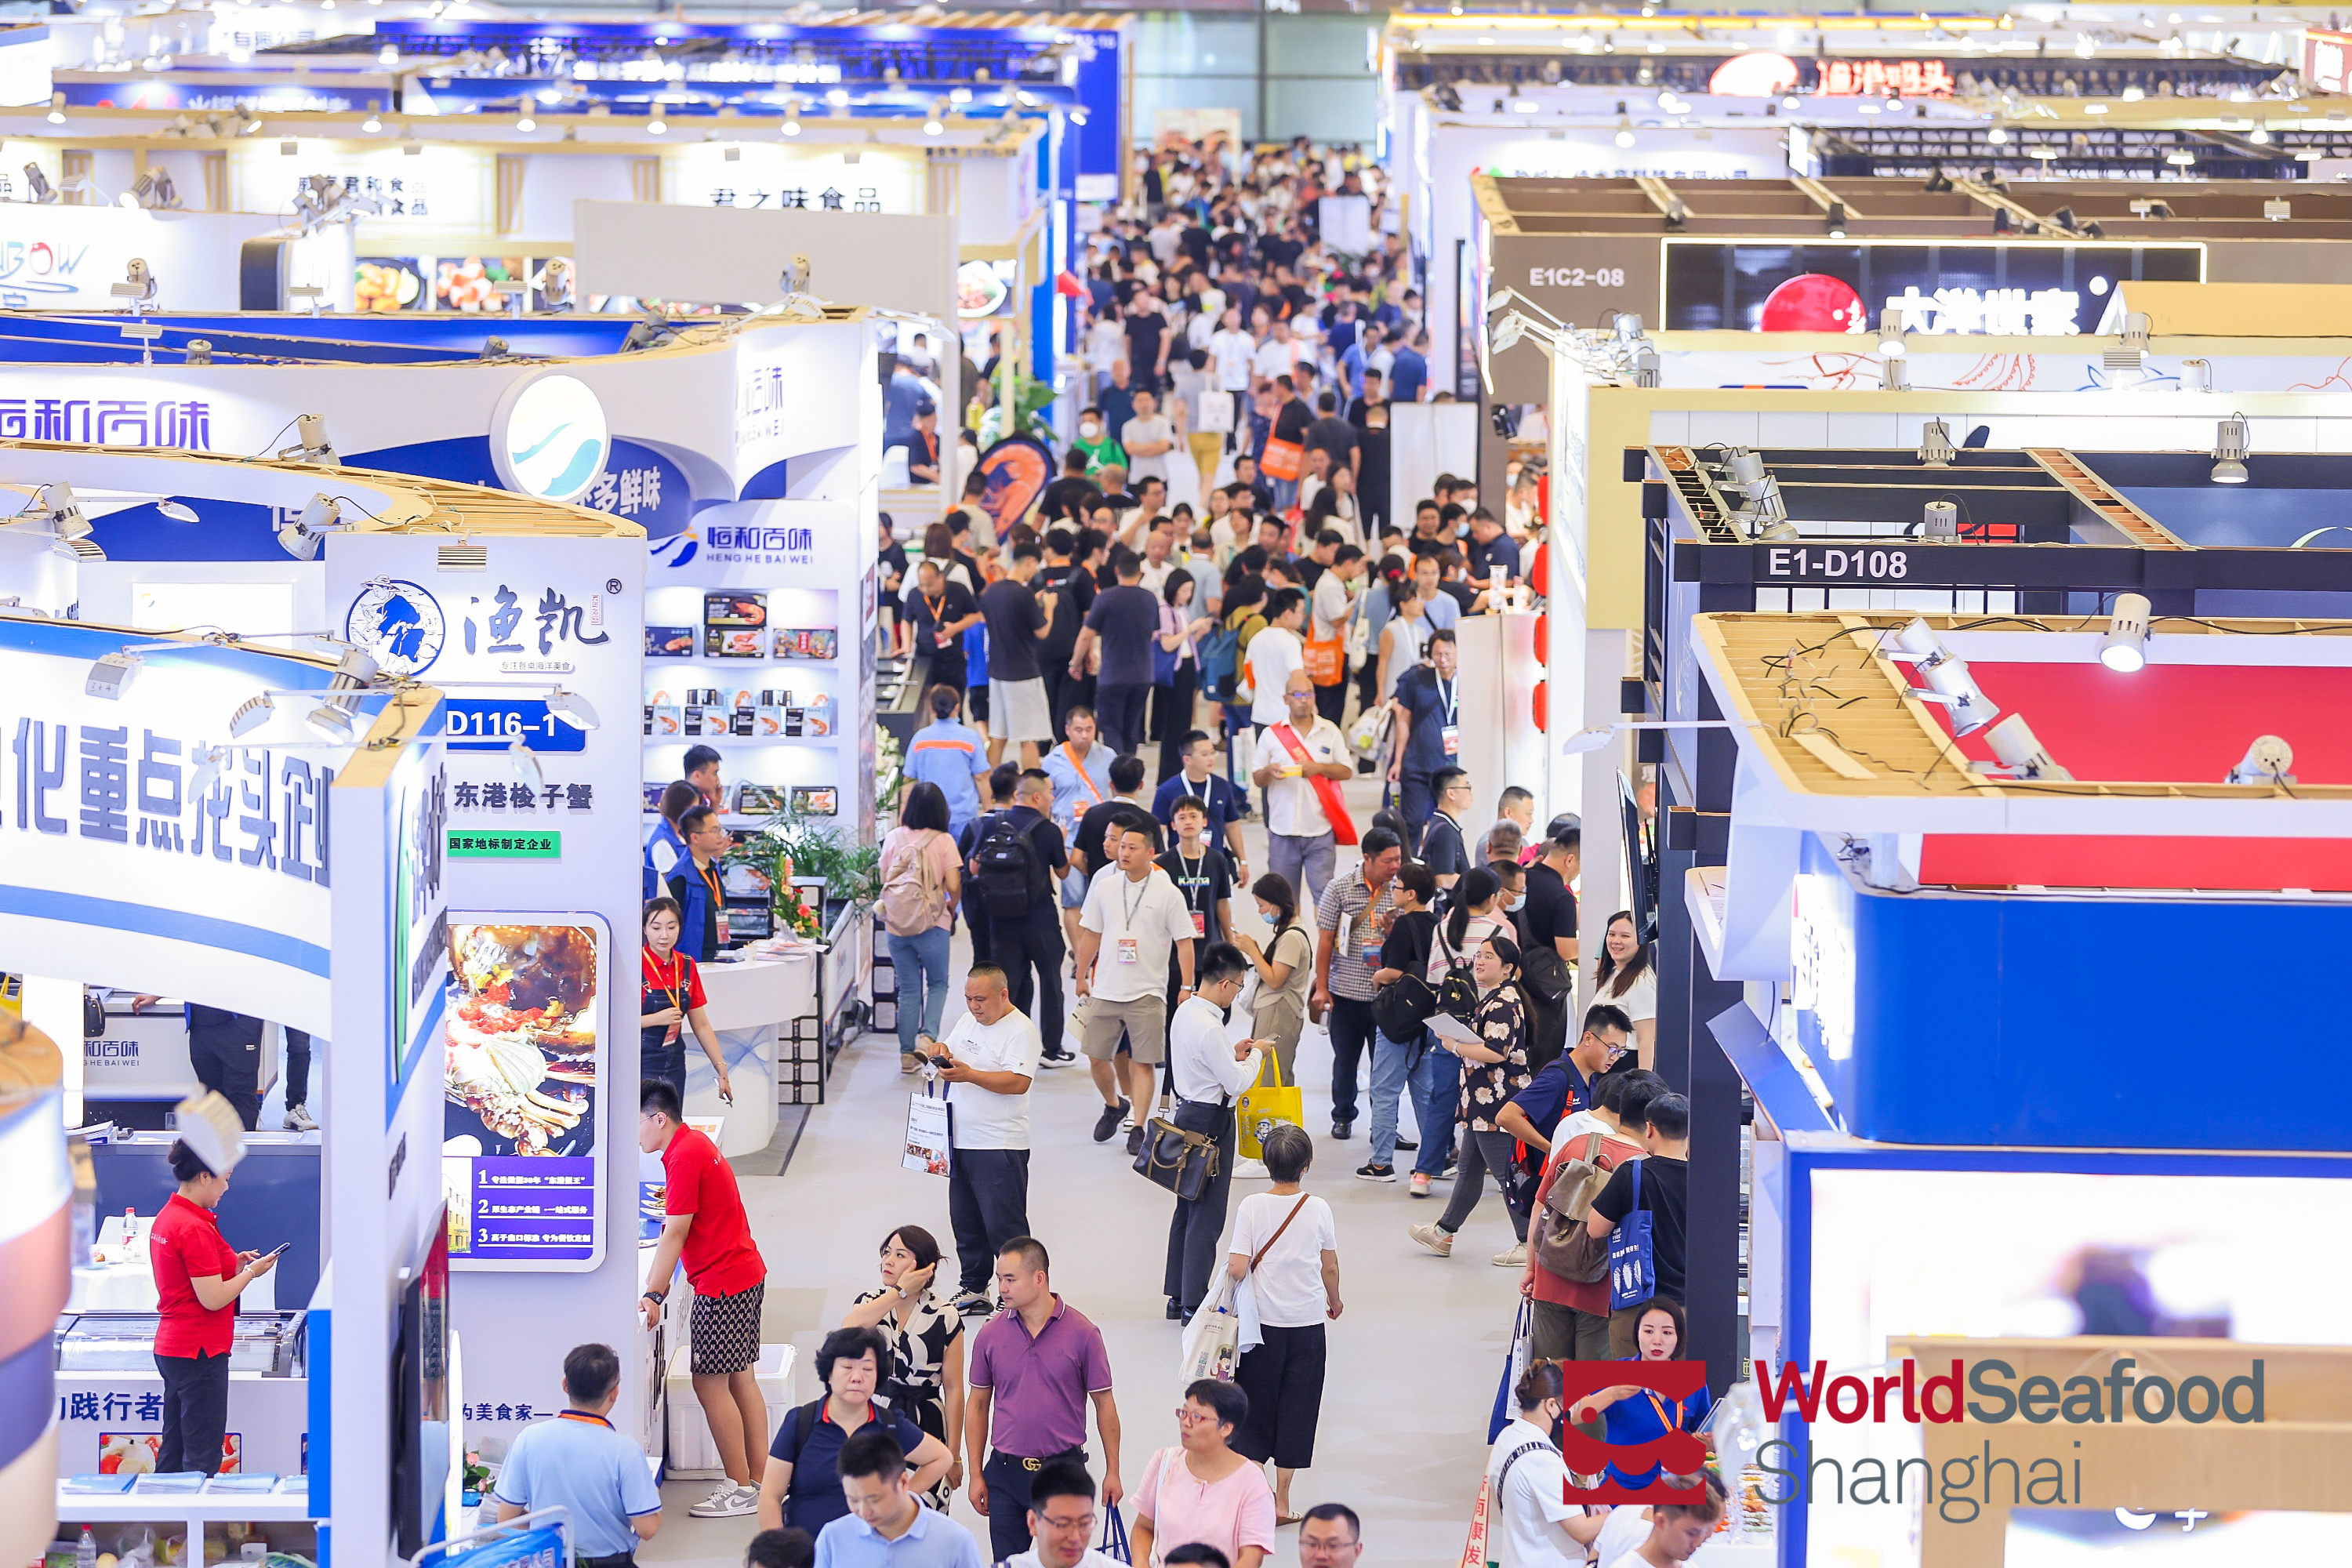 World Seafood Shanghai has concluded successfully(图3)